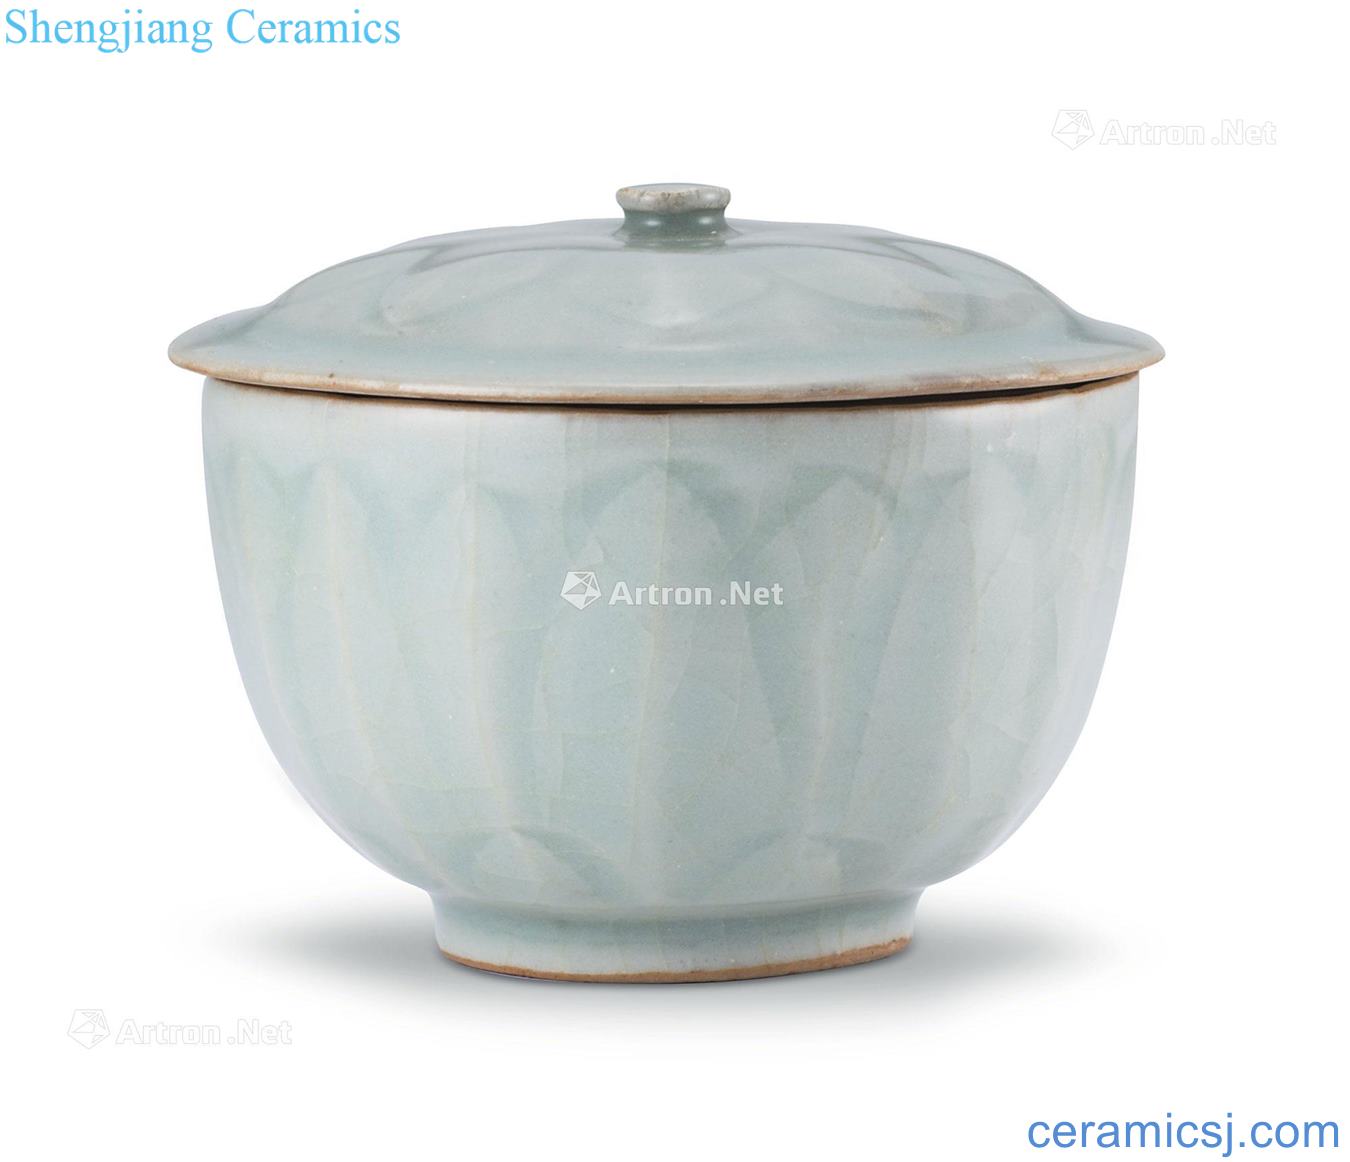 The song dynasty Longquan celadon green glaze 盌 lotus-shaped lines